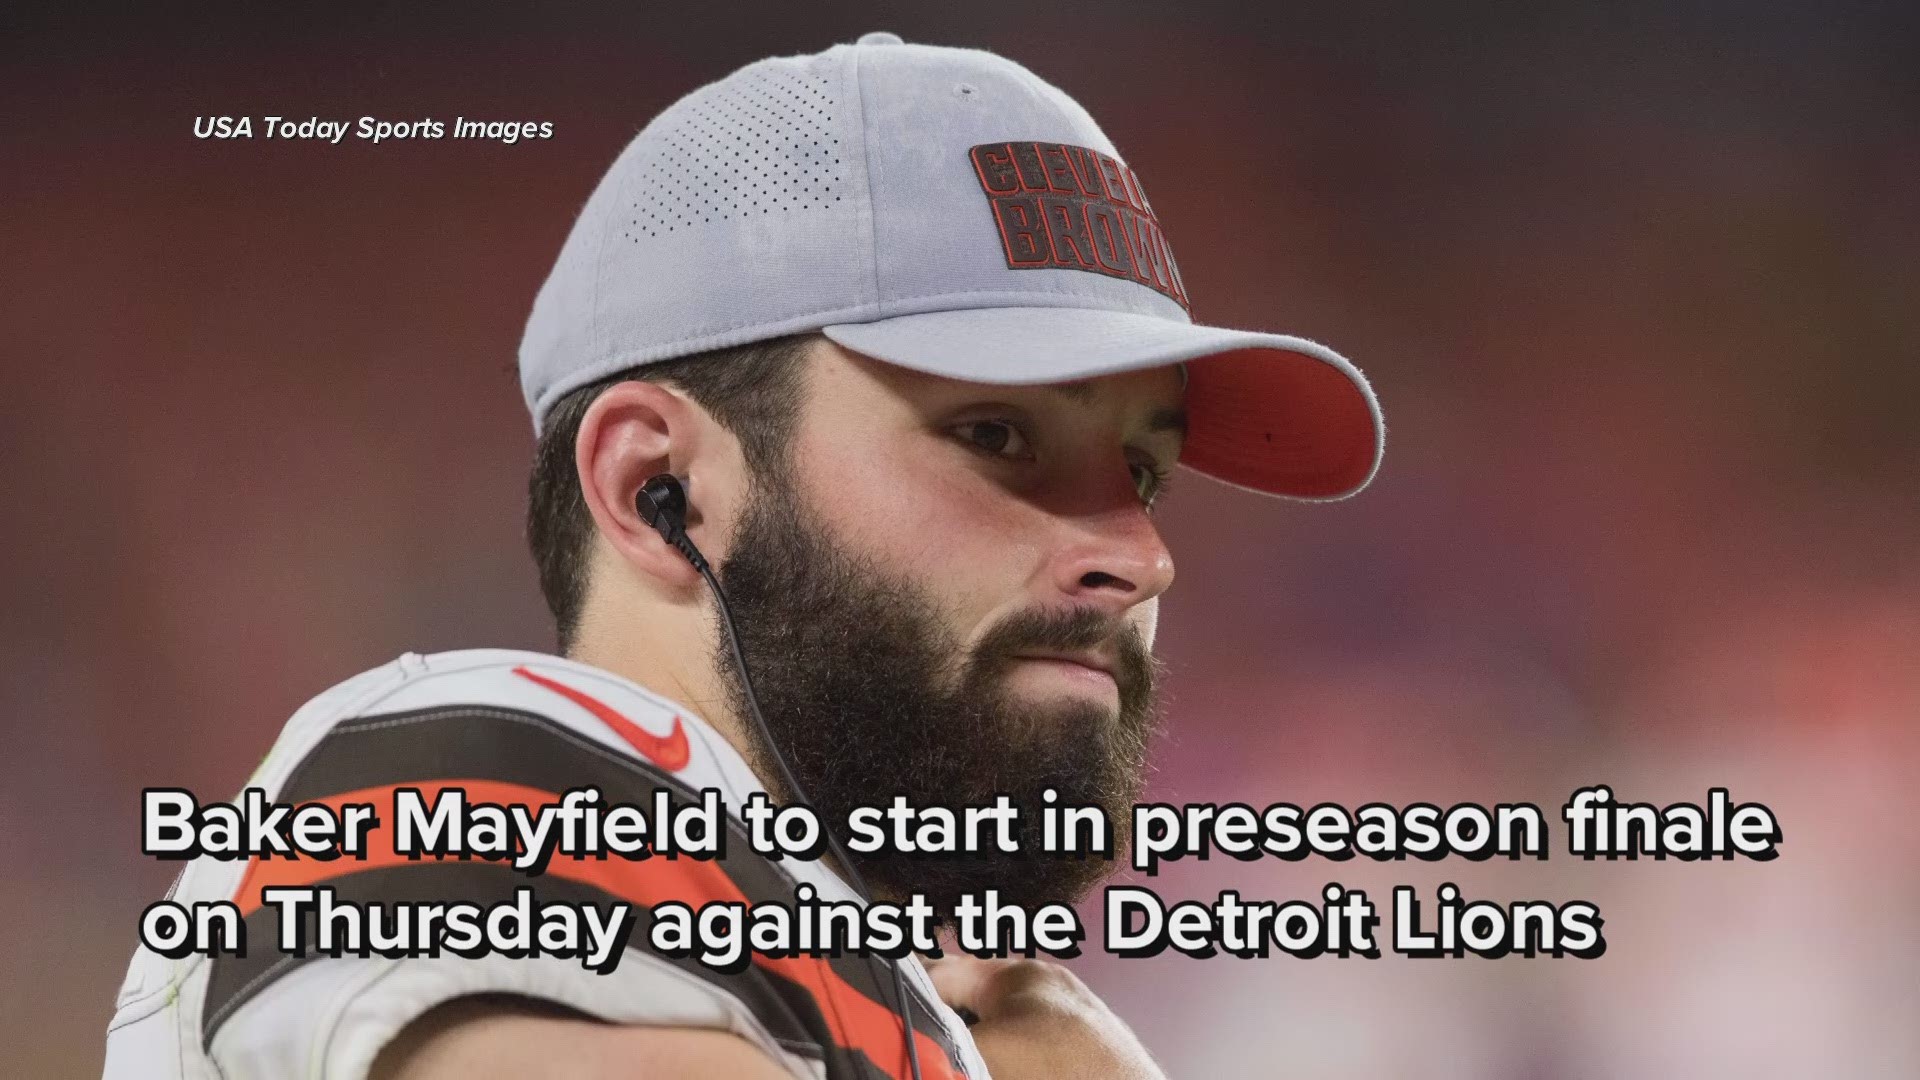 Baker Mayfield 'very ready' to start for Cleveland Browns in preseason finale at Detroit Lions